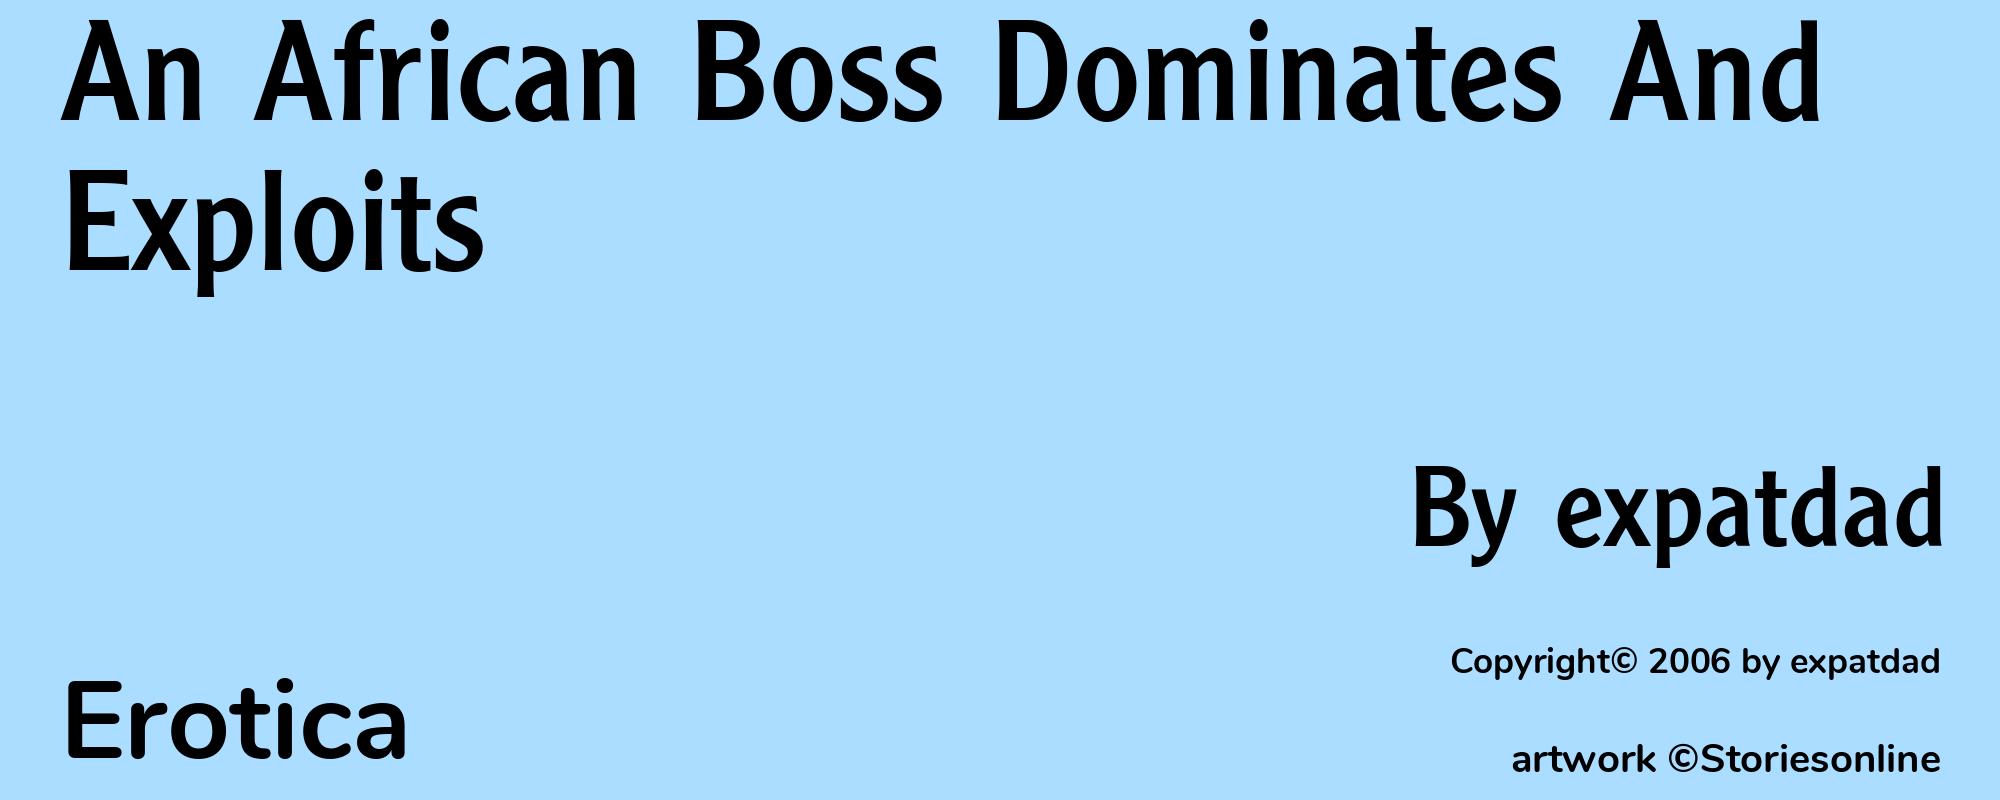 An African Boss Dominates And Exploits - Cover